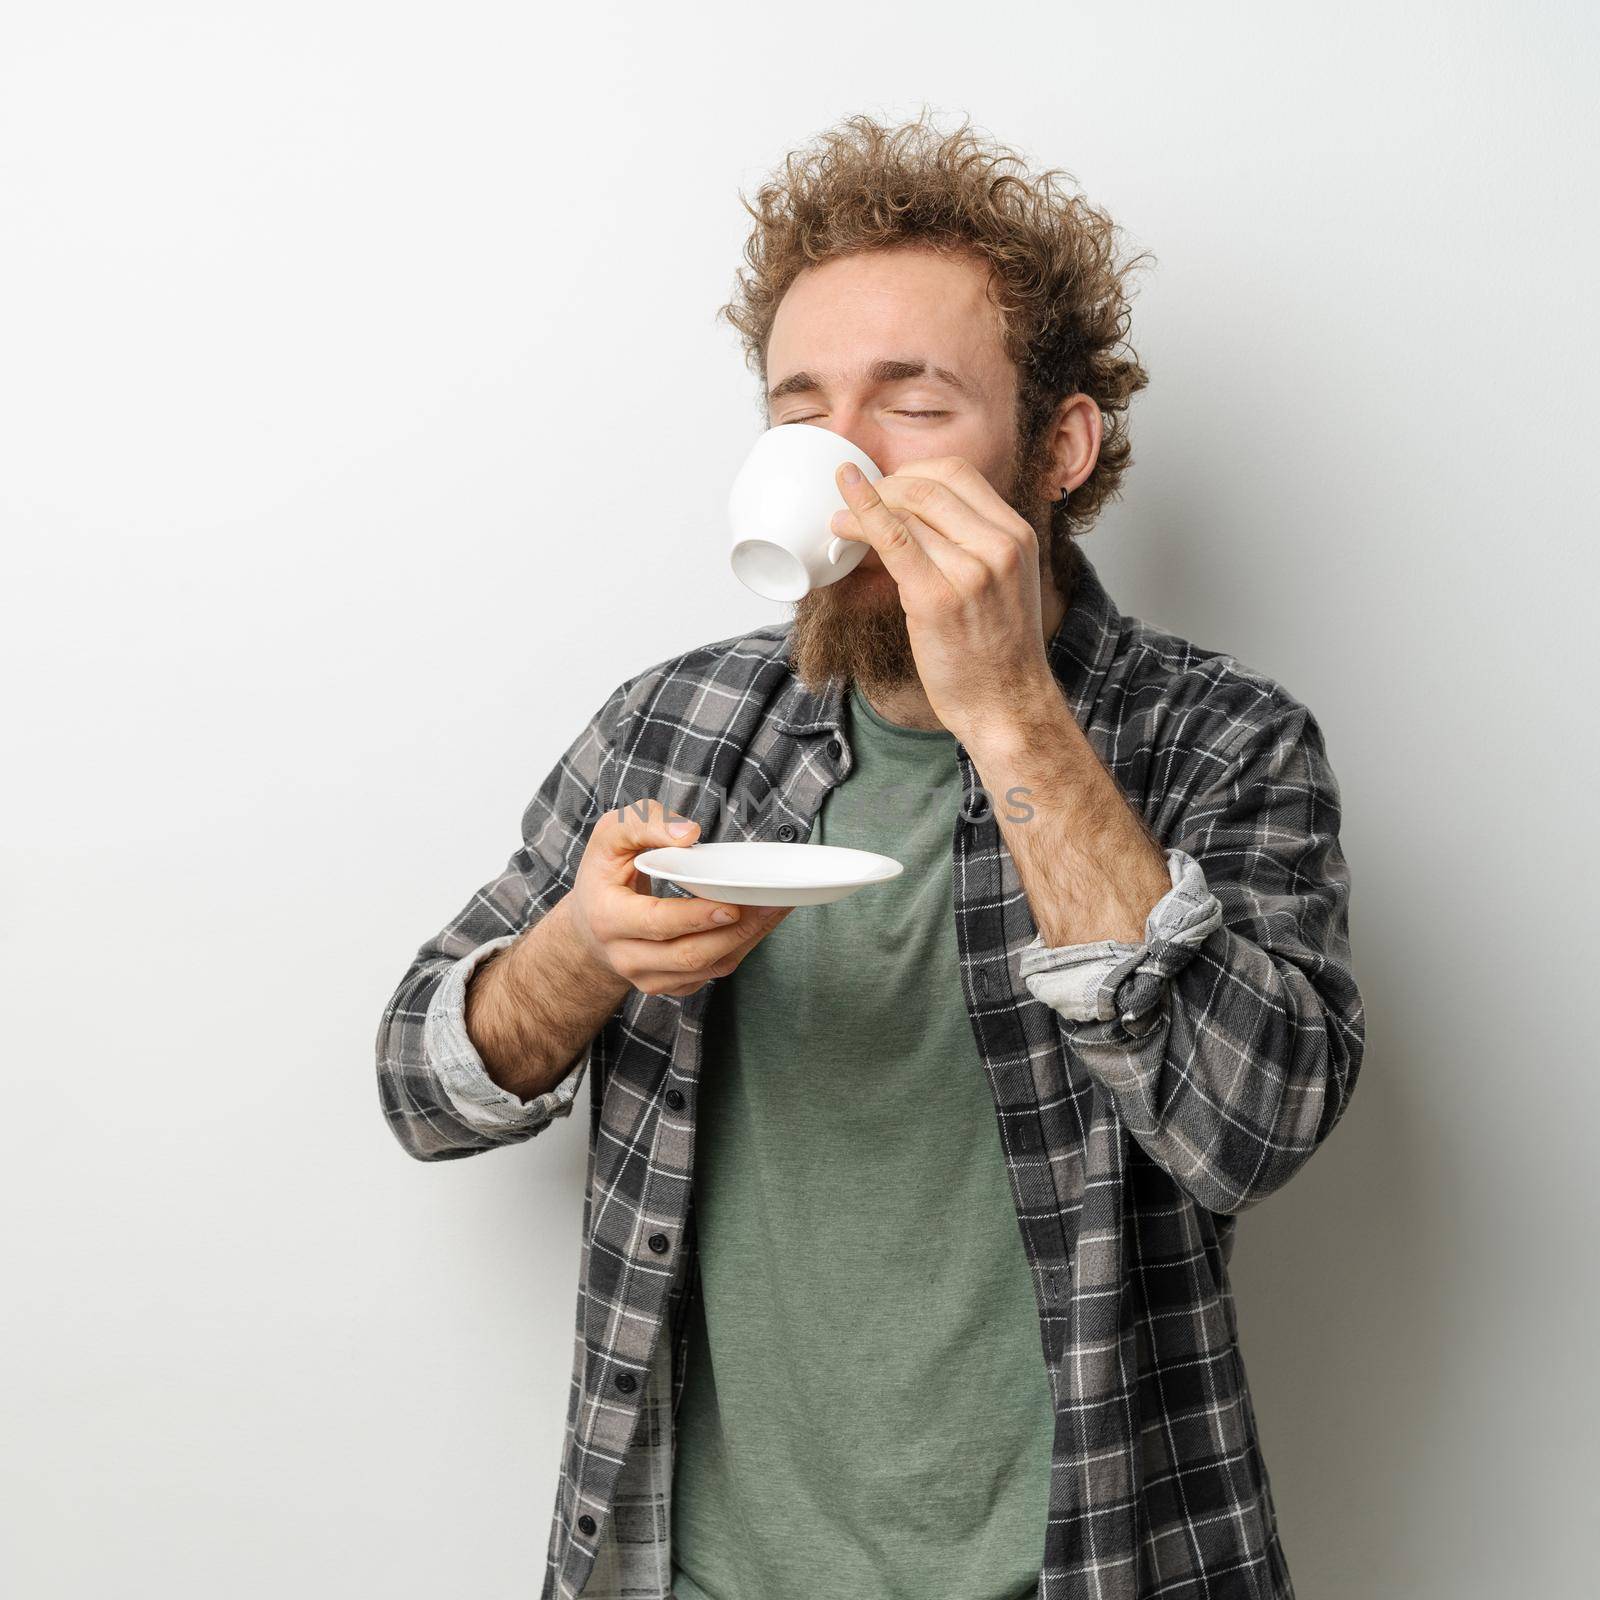 Good looking man with curly hair and beard drinking coffee holding cup, wearing plaid long sleeve shirt isolated on white background by LipikStockMedia